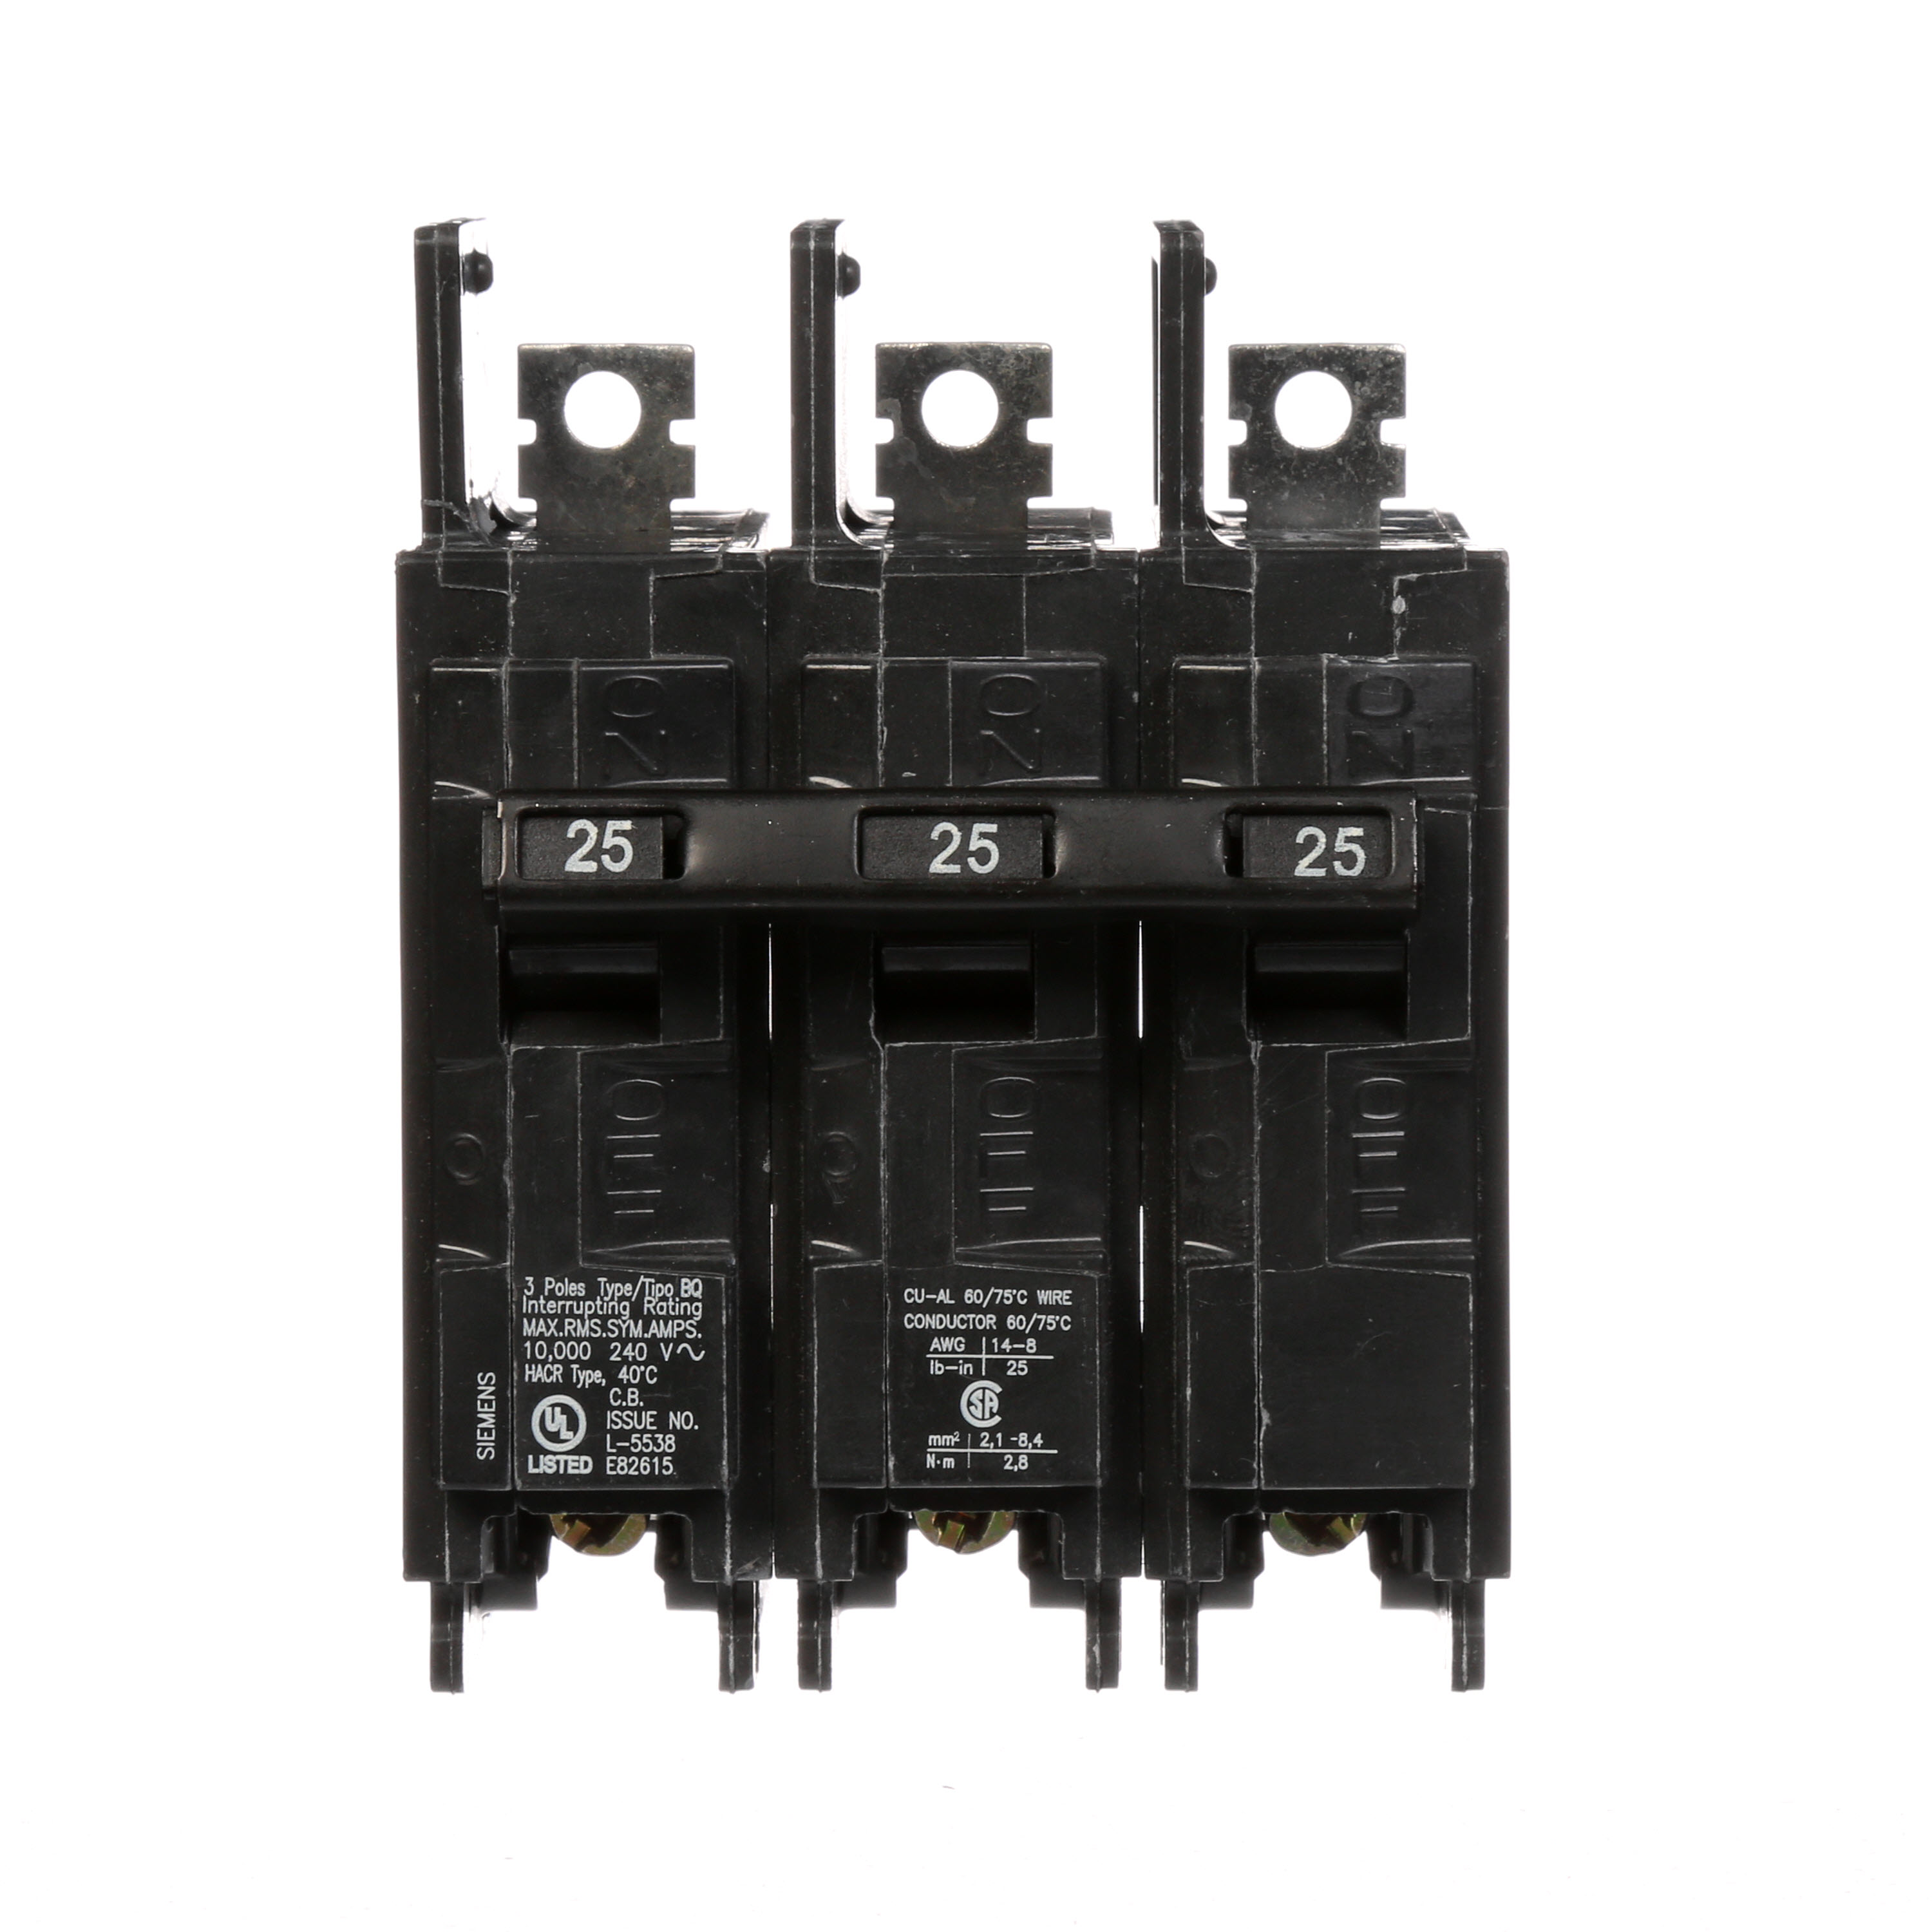 Siemens Low Voltage Molded Case Circuit Breakers General Purpose MCCBs are Circuit Protection Molded Case Circuit Breakers. 3-Pole Common-Trip circuit breaker type BQ. Rated 240V (025A) (AIR 10 kA). Special features Load side lugs are included.